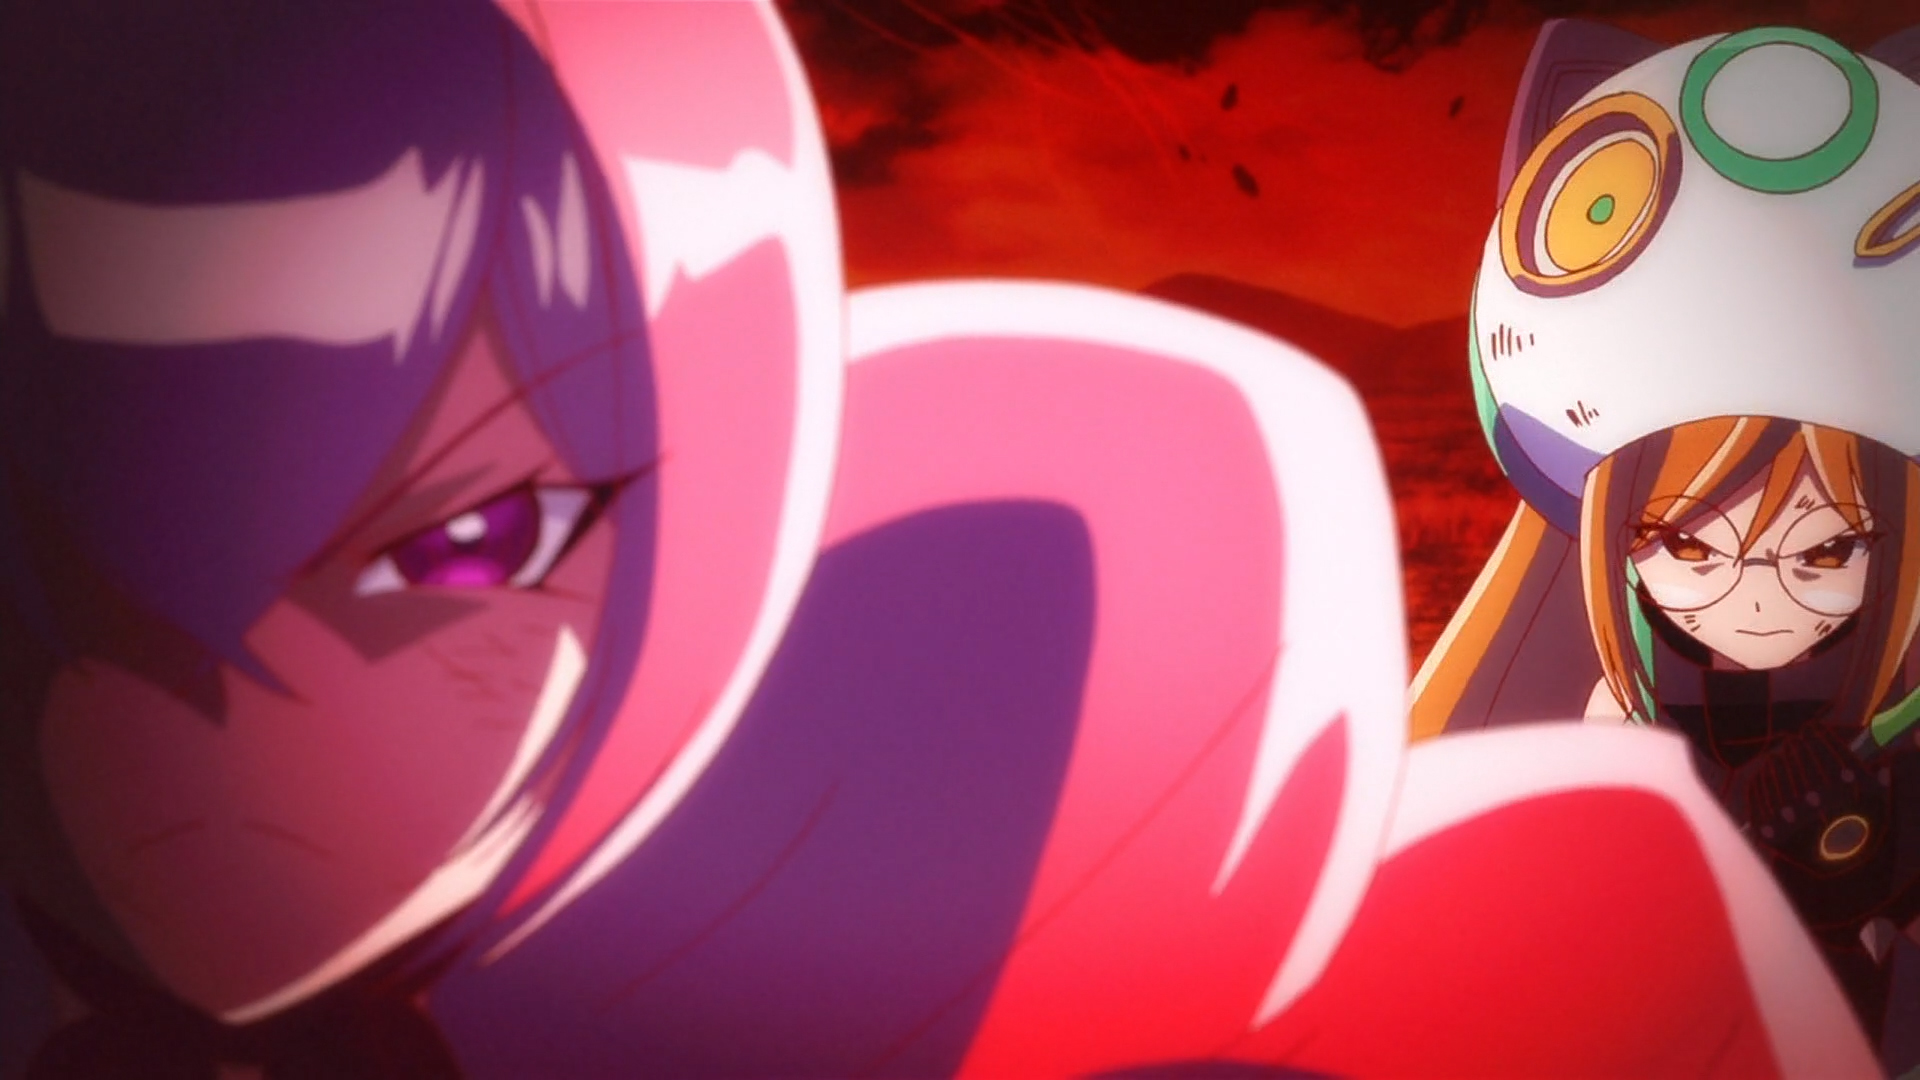 Twin Star Exorcists Ep 43 Review: Rokuro's Origin – The Reviewer's